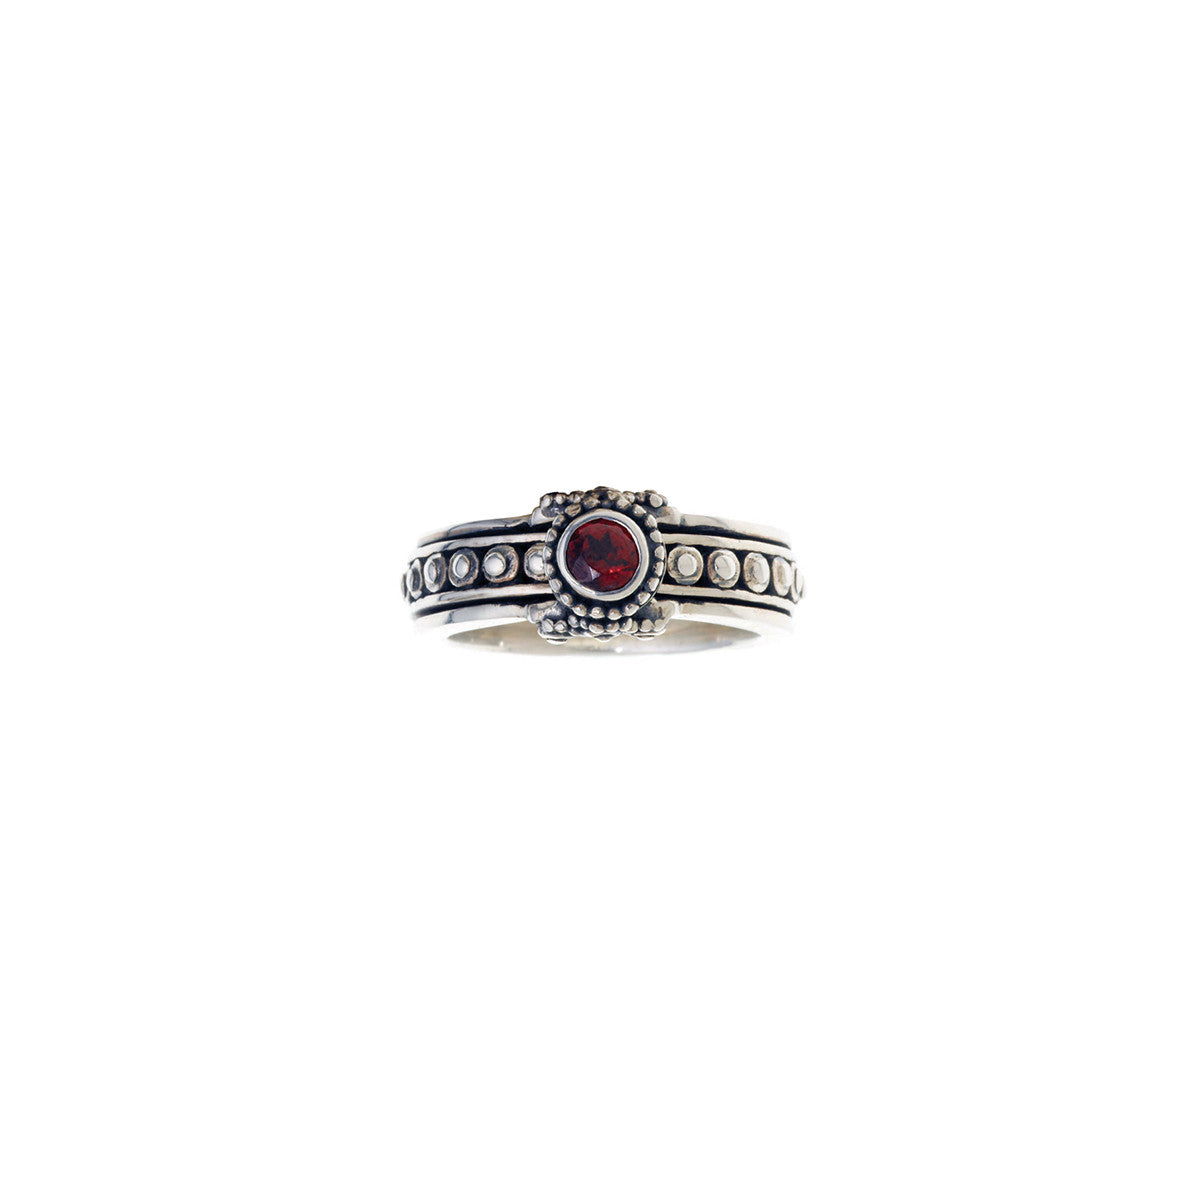 Vintage Classical Sterling Silver And Garnet Spin Ring - Cynthia Gale New York - 3